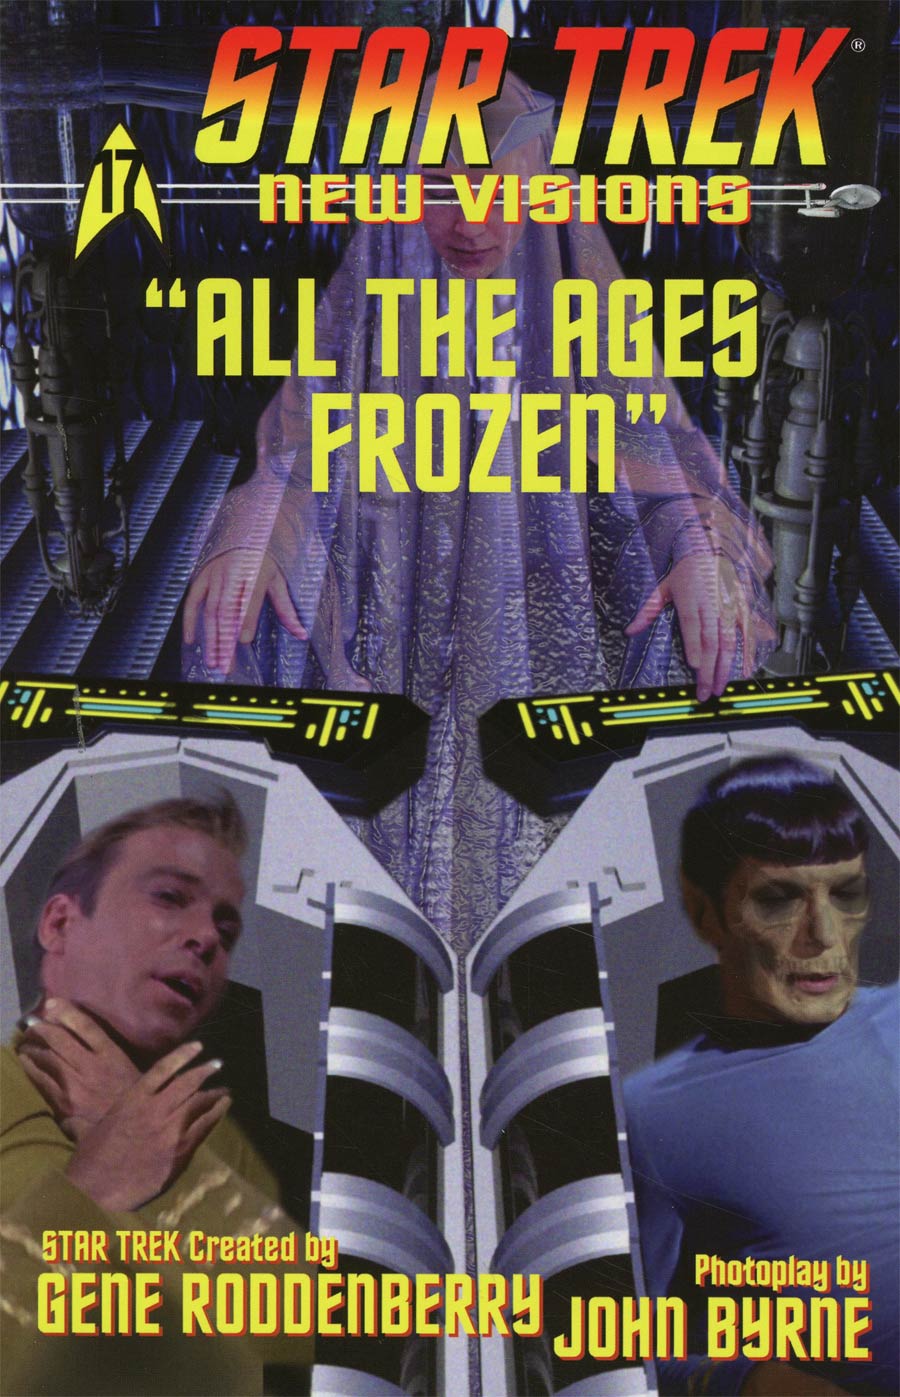 Star Trek New Visions #15 All The Ages Frozen